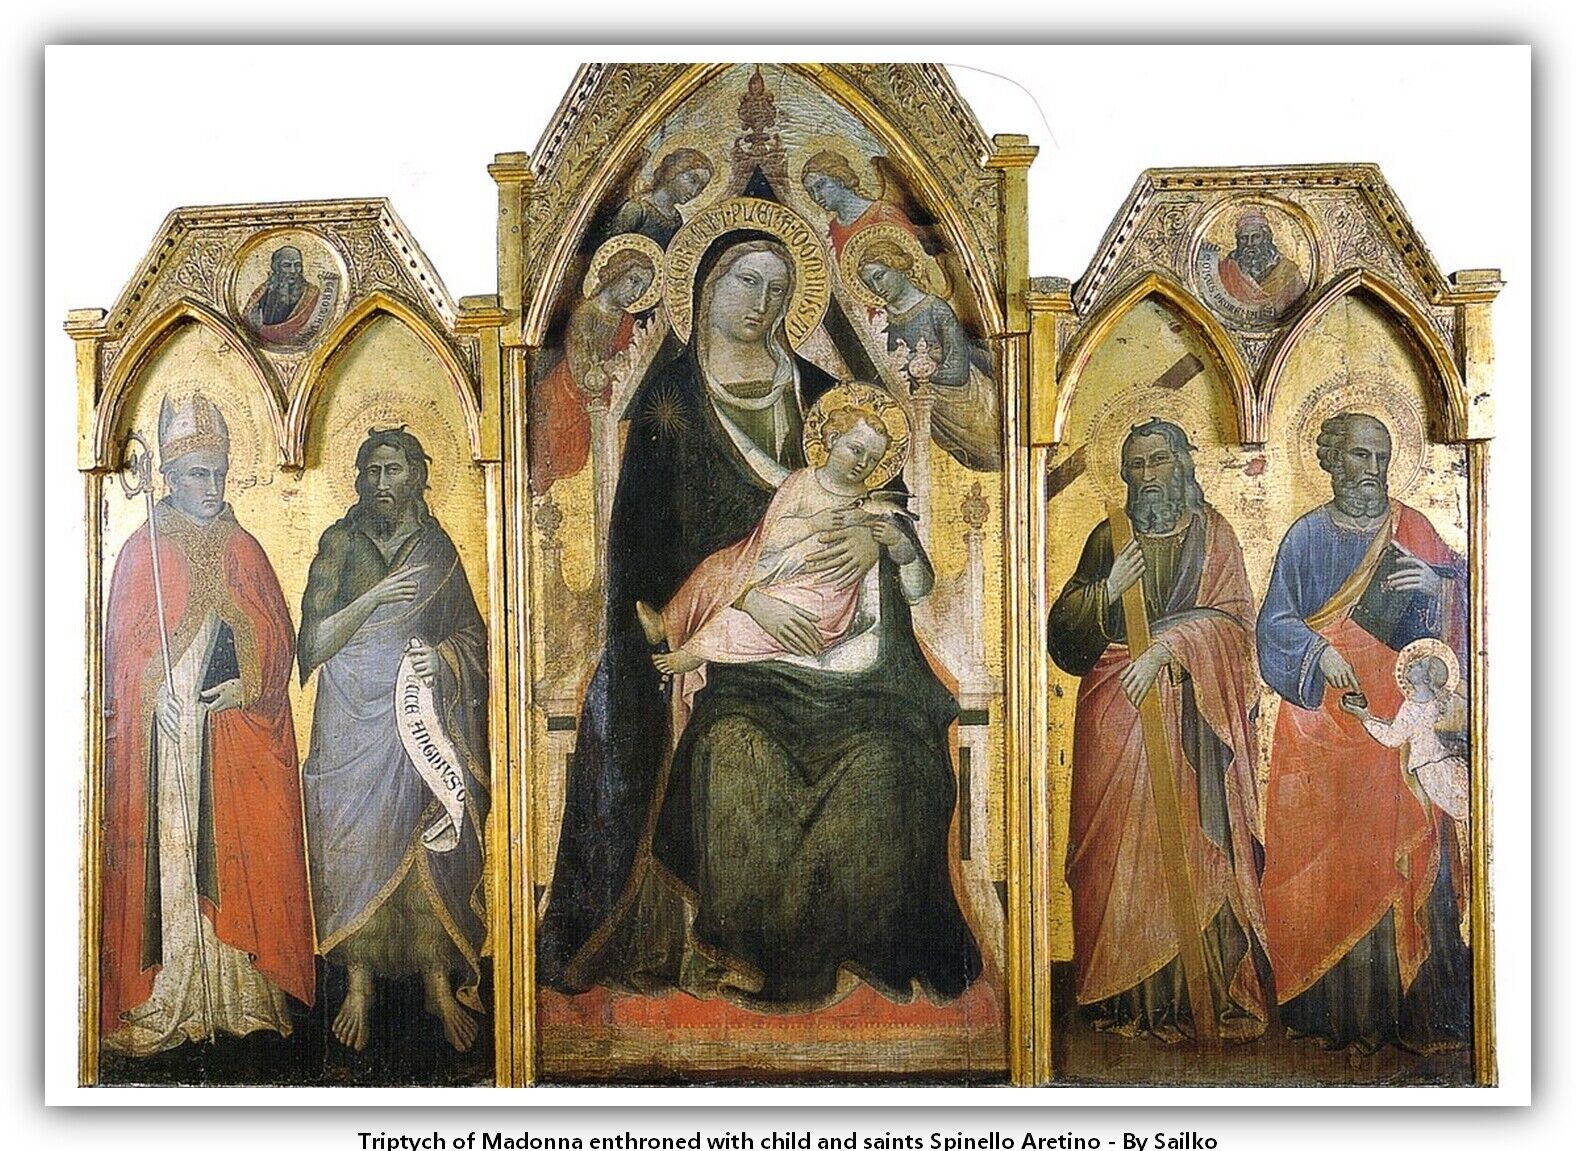 Triptych of Madonna enthroned with child and saints Spinello Aretino